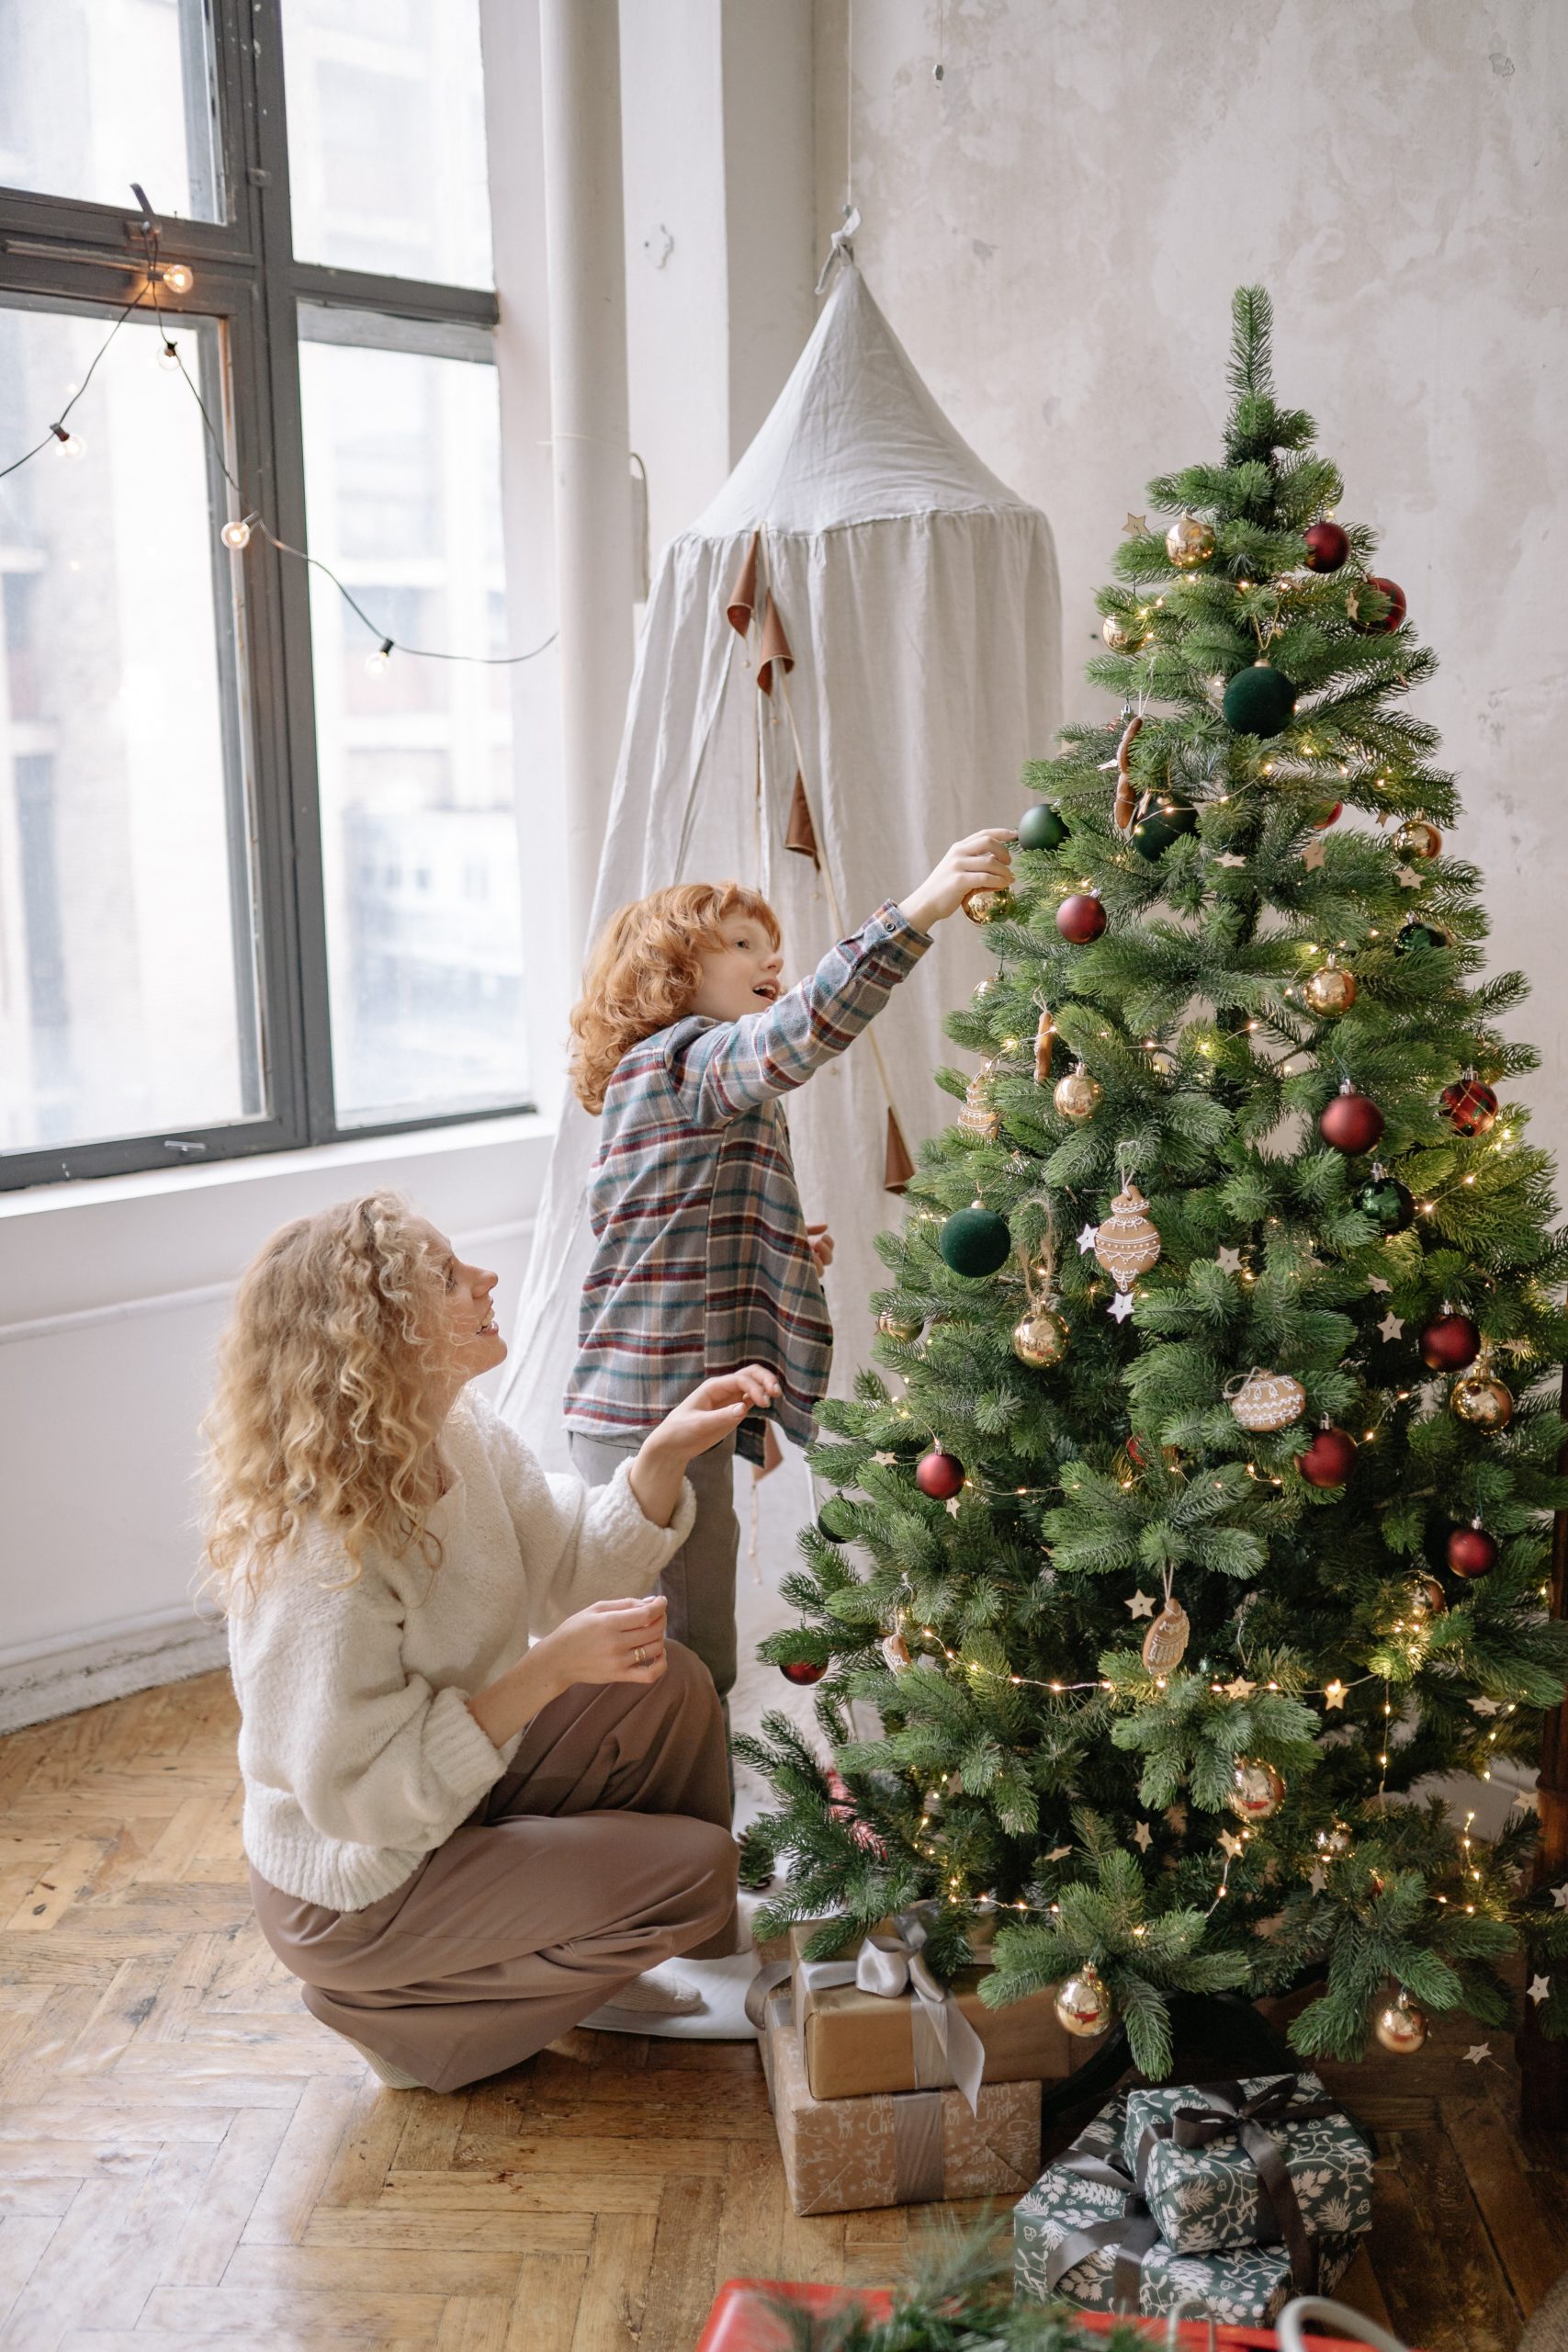 Do You Have Questions about Holiday Parent Time?